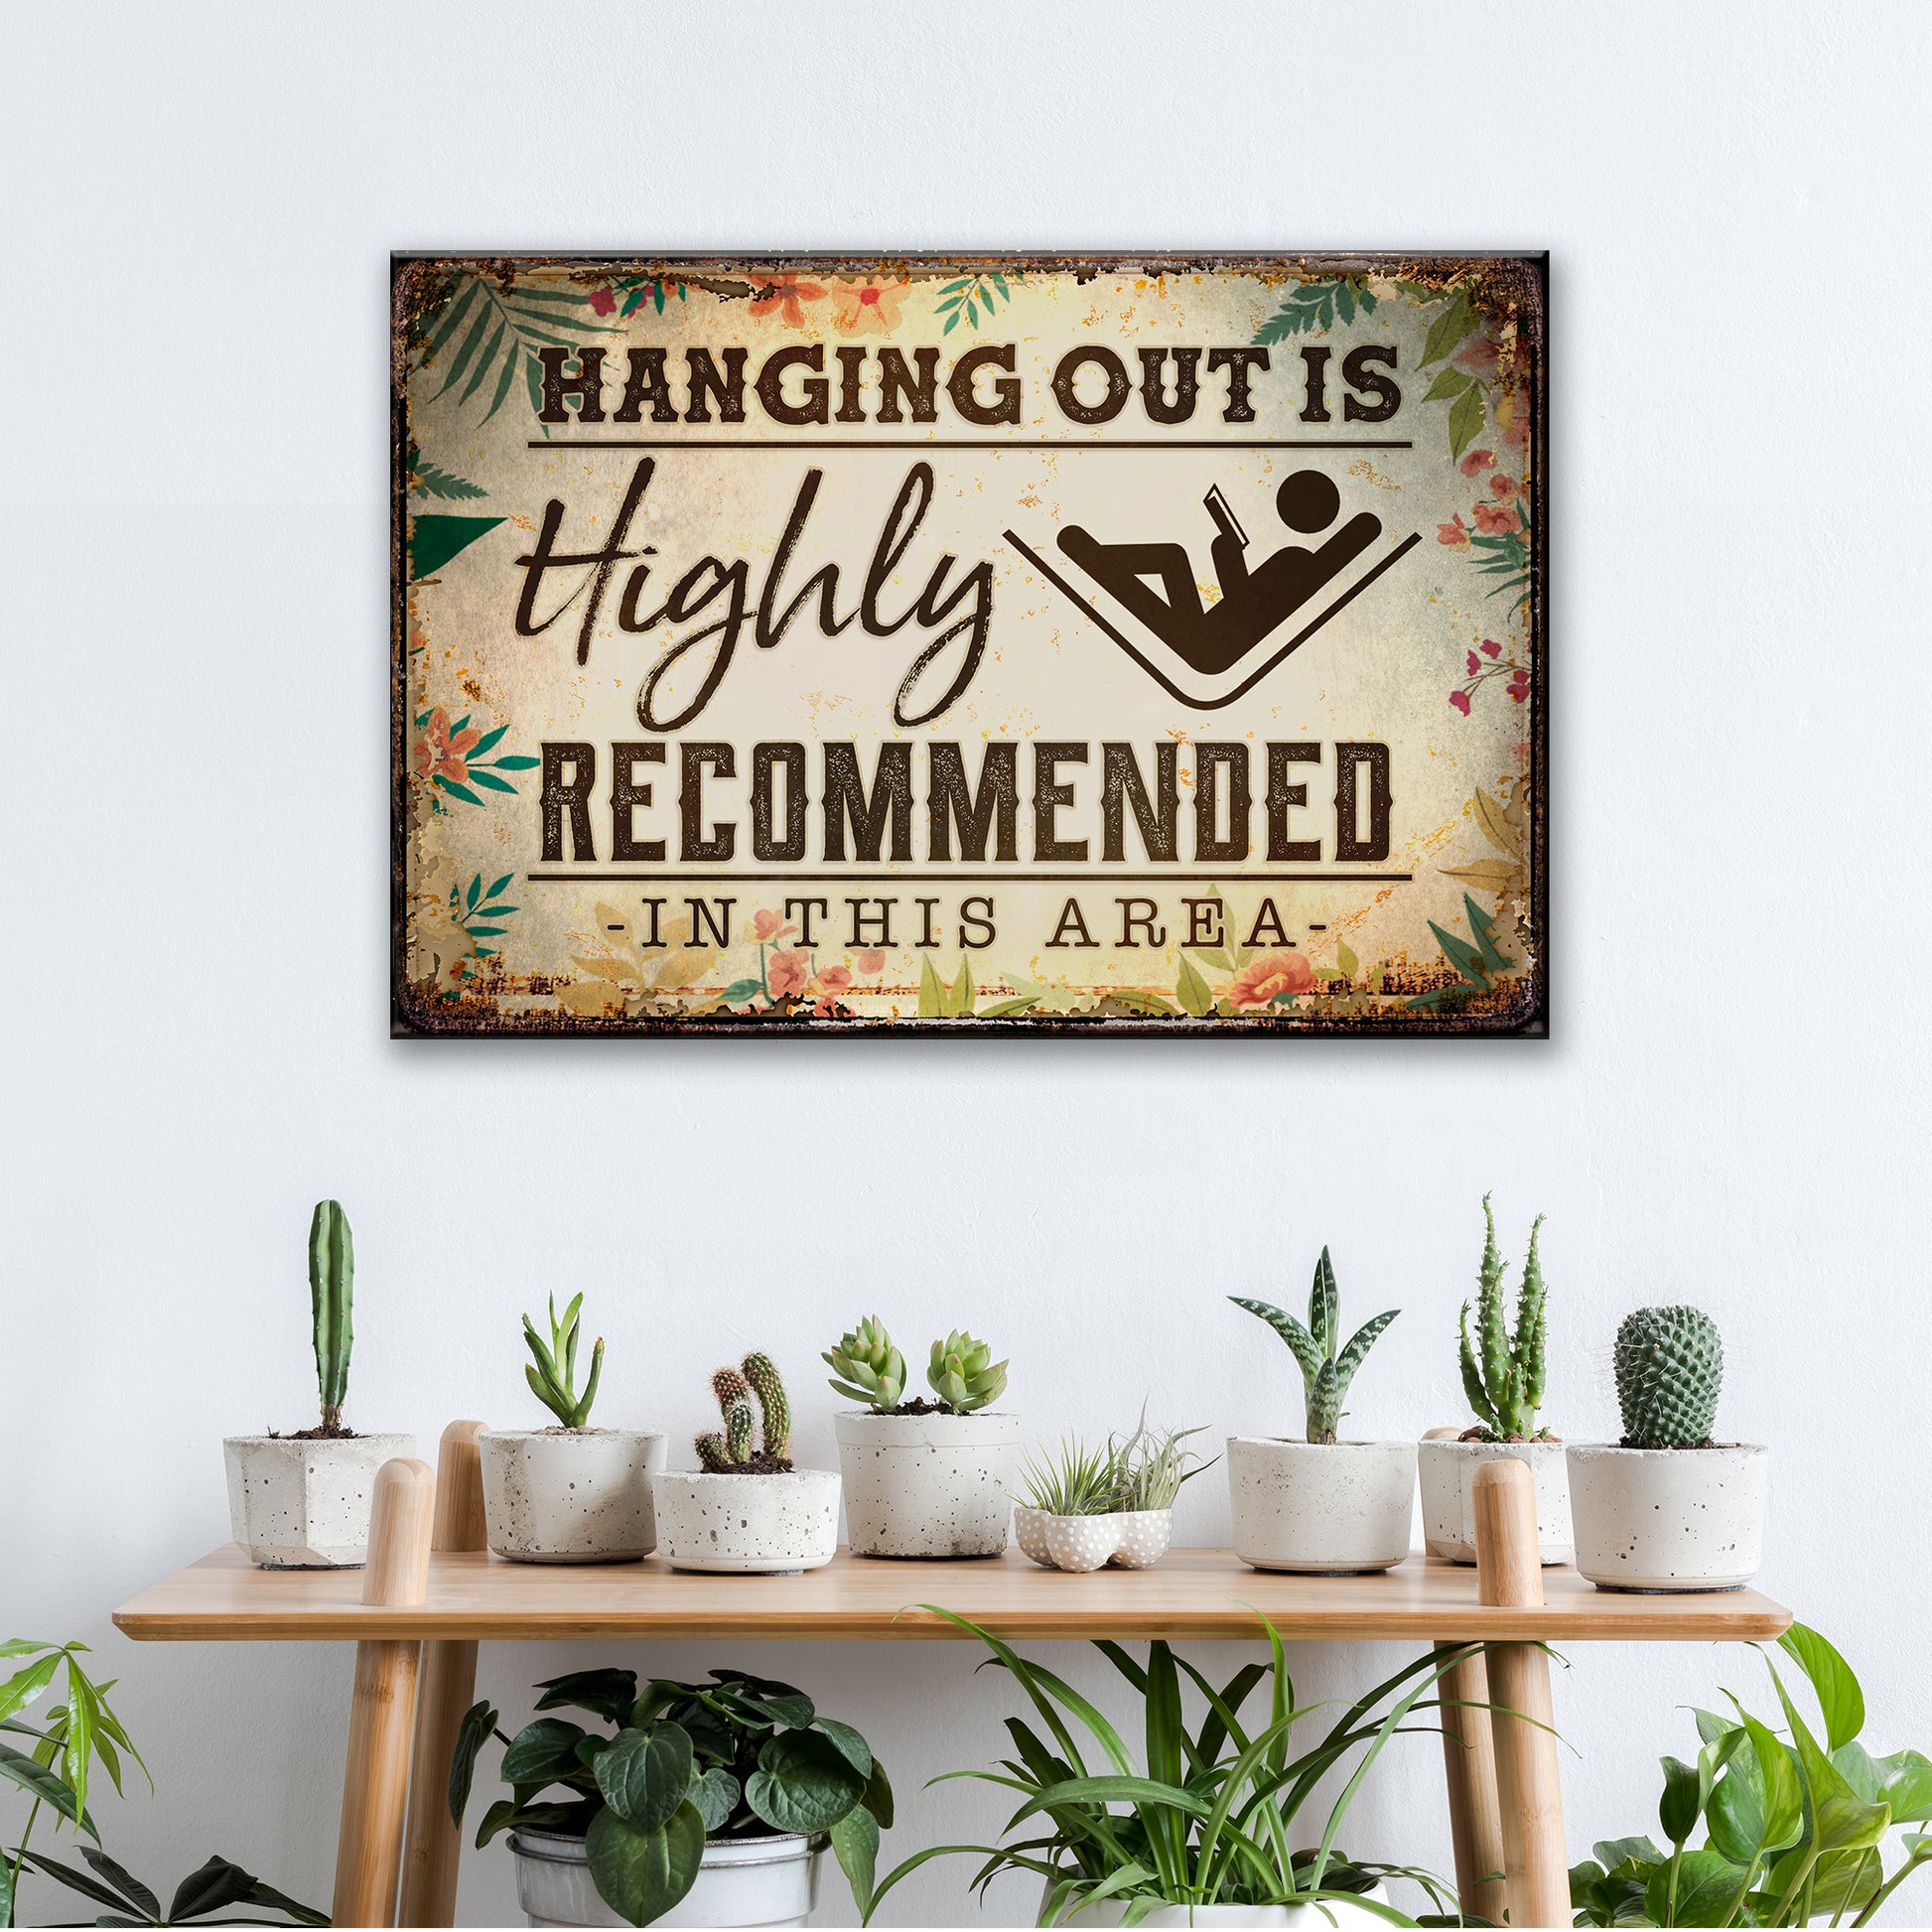 Hanging Out Is Recommended Sign Style 1 - Image by Tailored Canvases